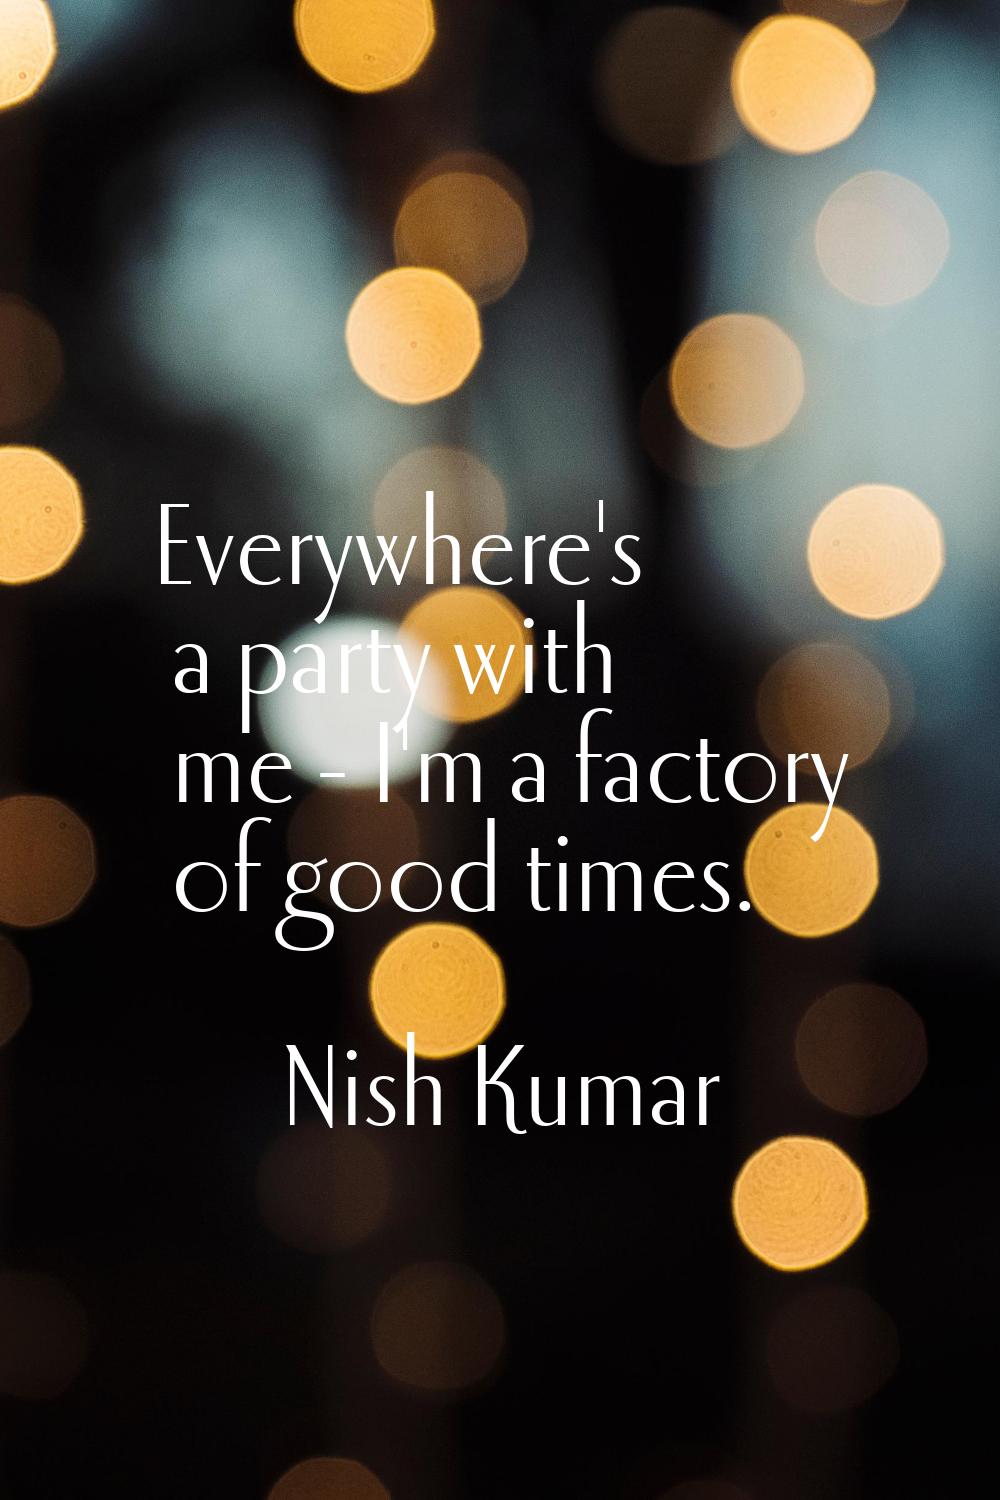 Everywhere's a party with me - I'm a factory of good times.